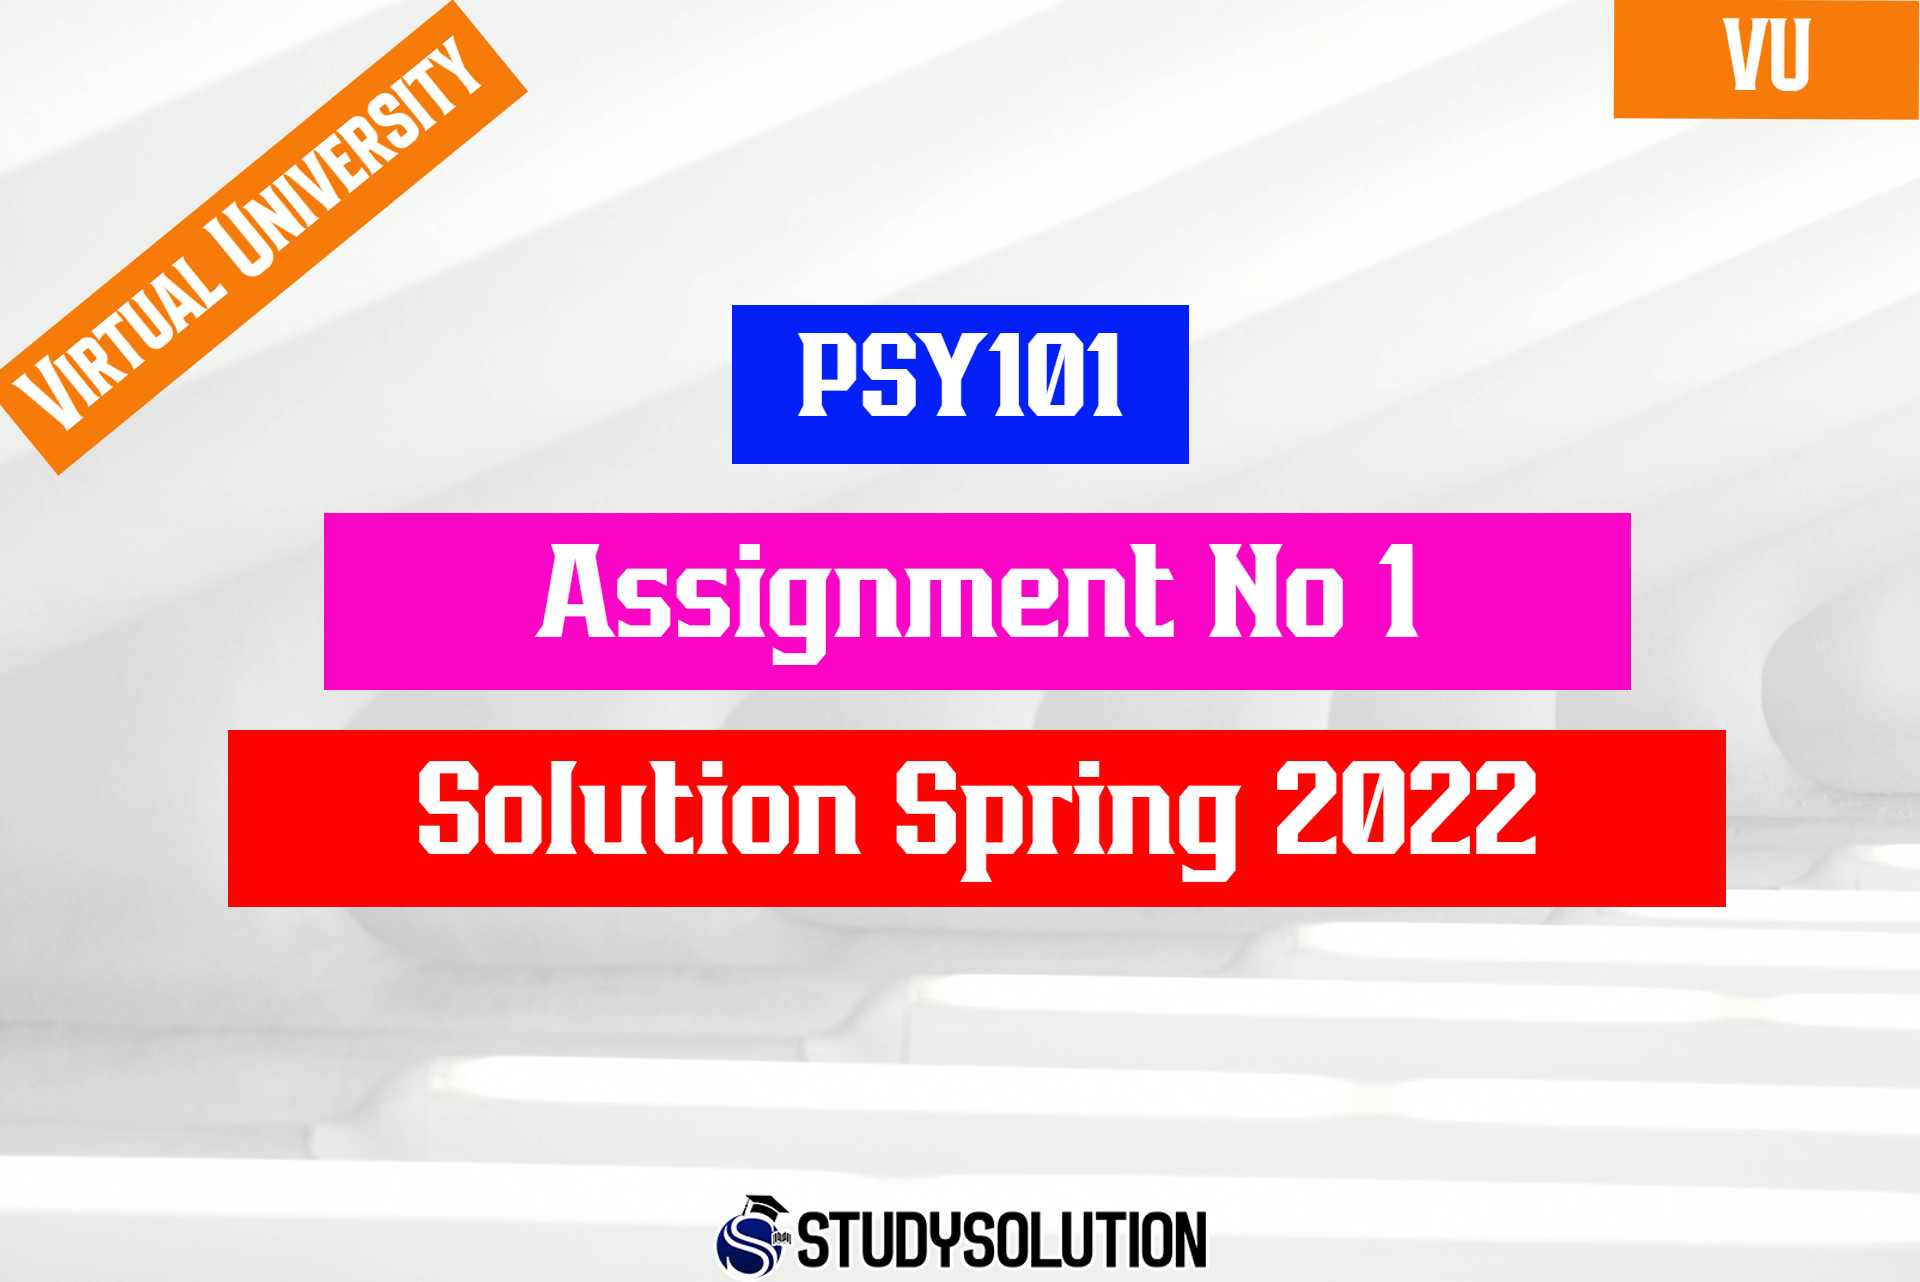 PSY101 Assignment No 1 Solution Spring 2022